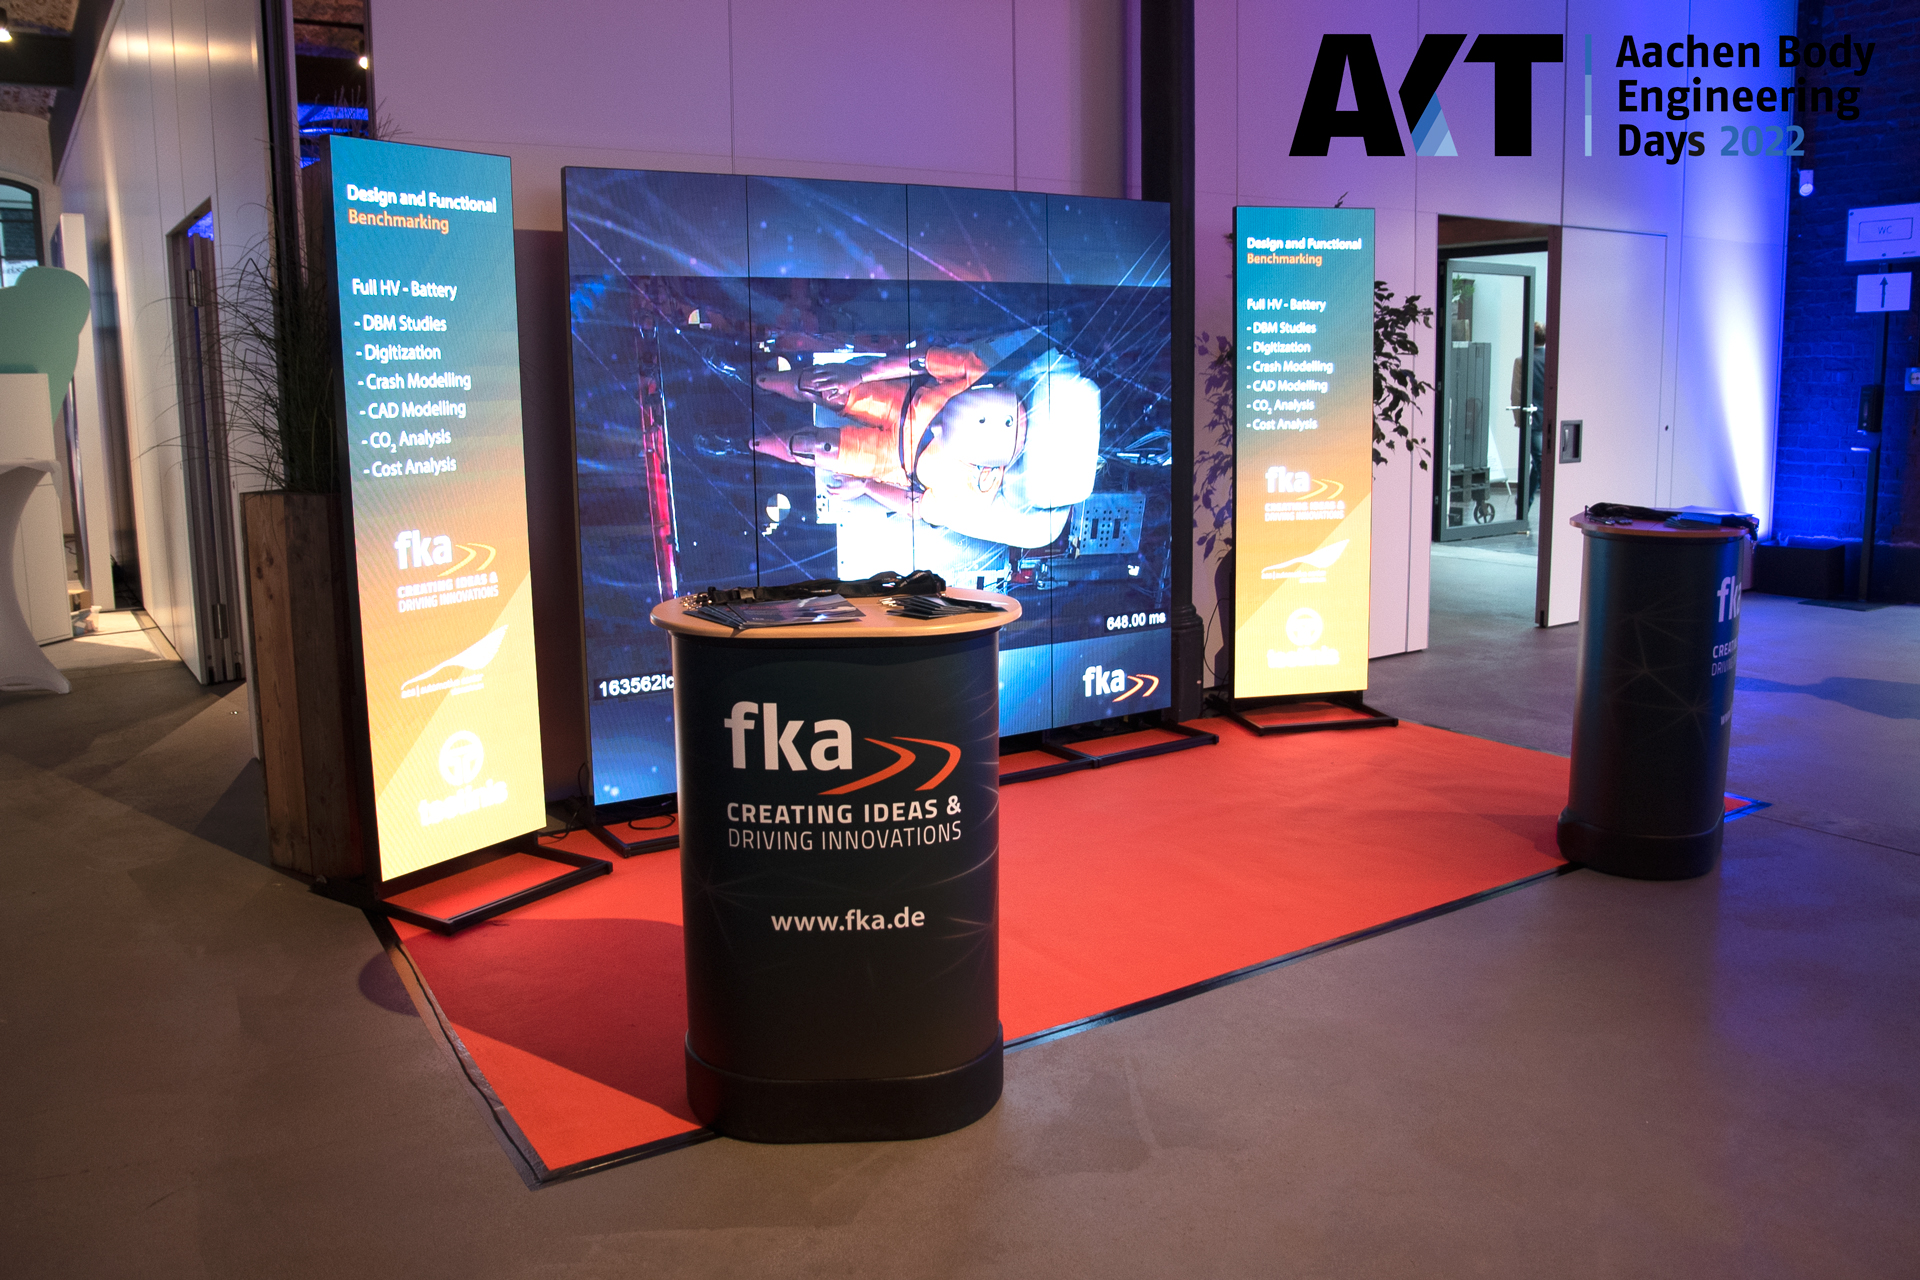 The fka booth at the Aachen Body Engineering Days 2022